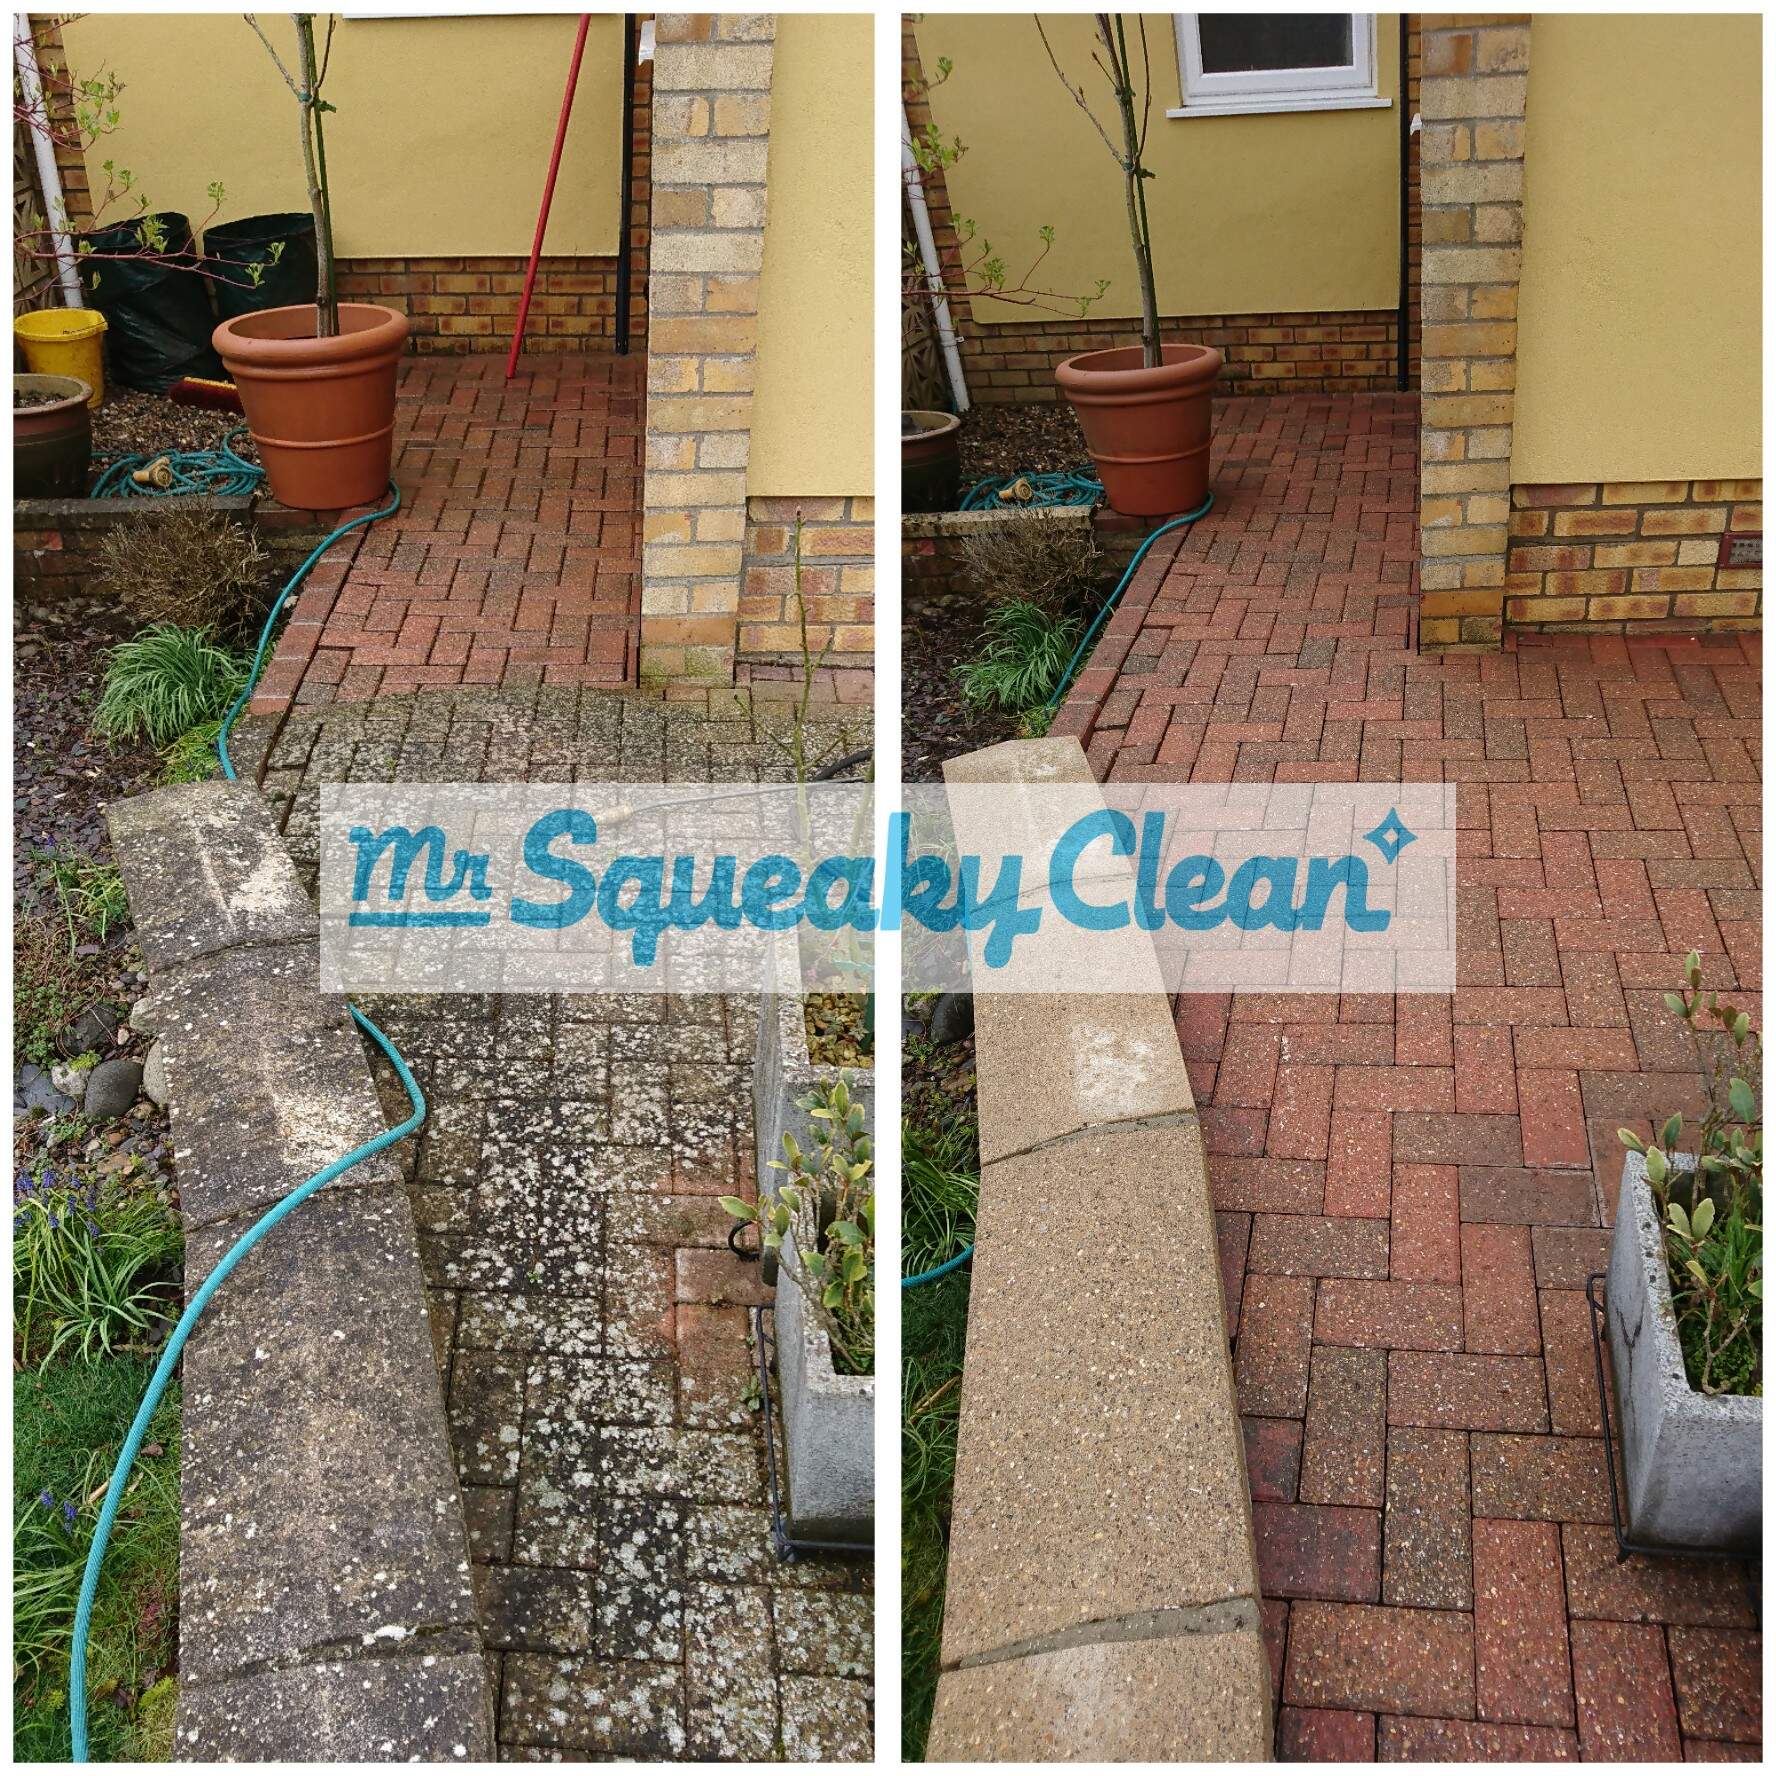 Driveway cleaning in Ely, Cambridgeshire